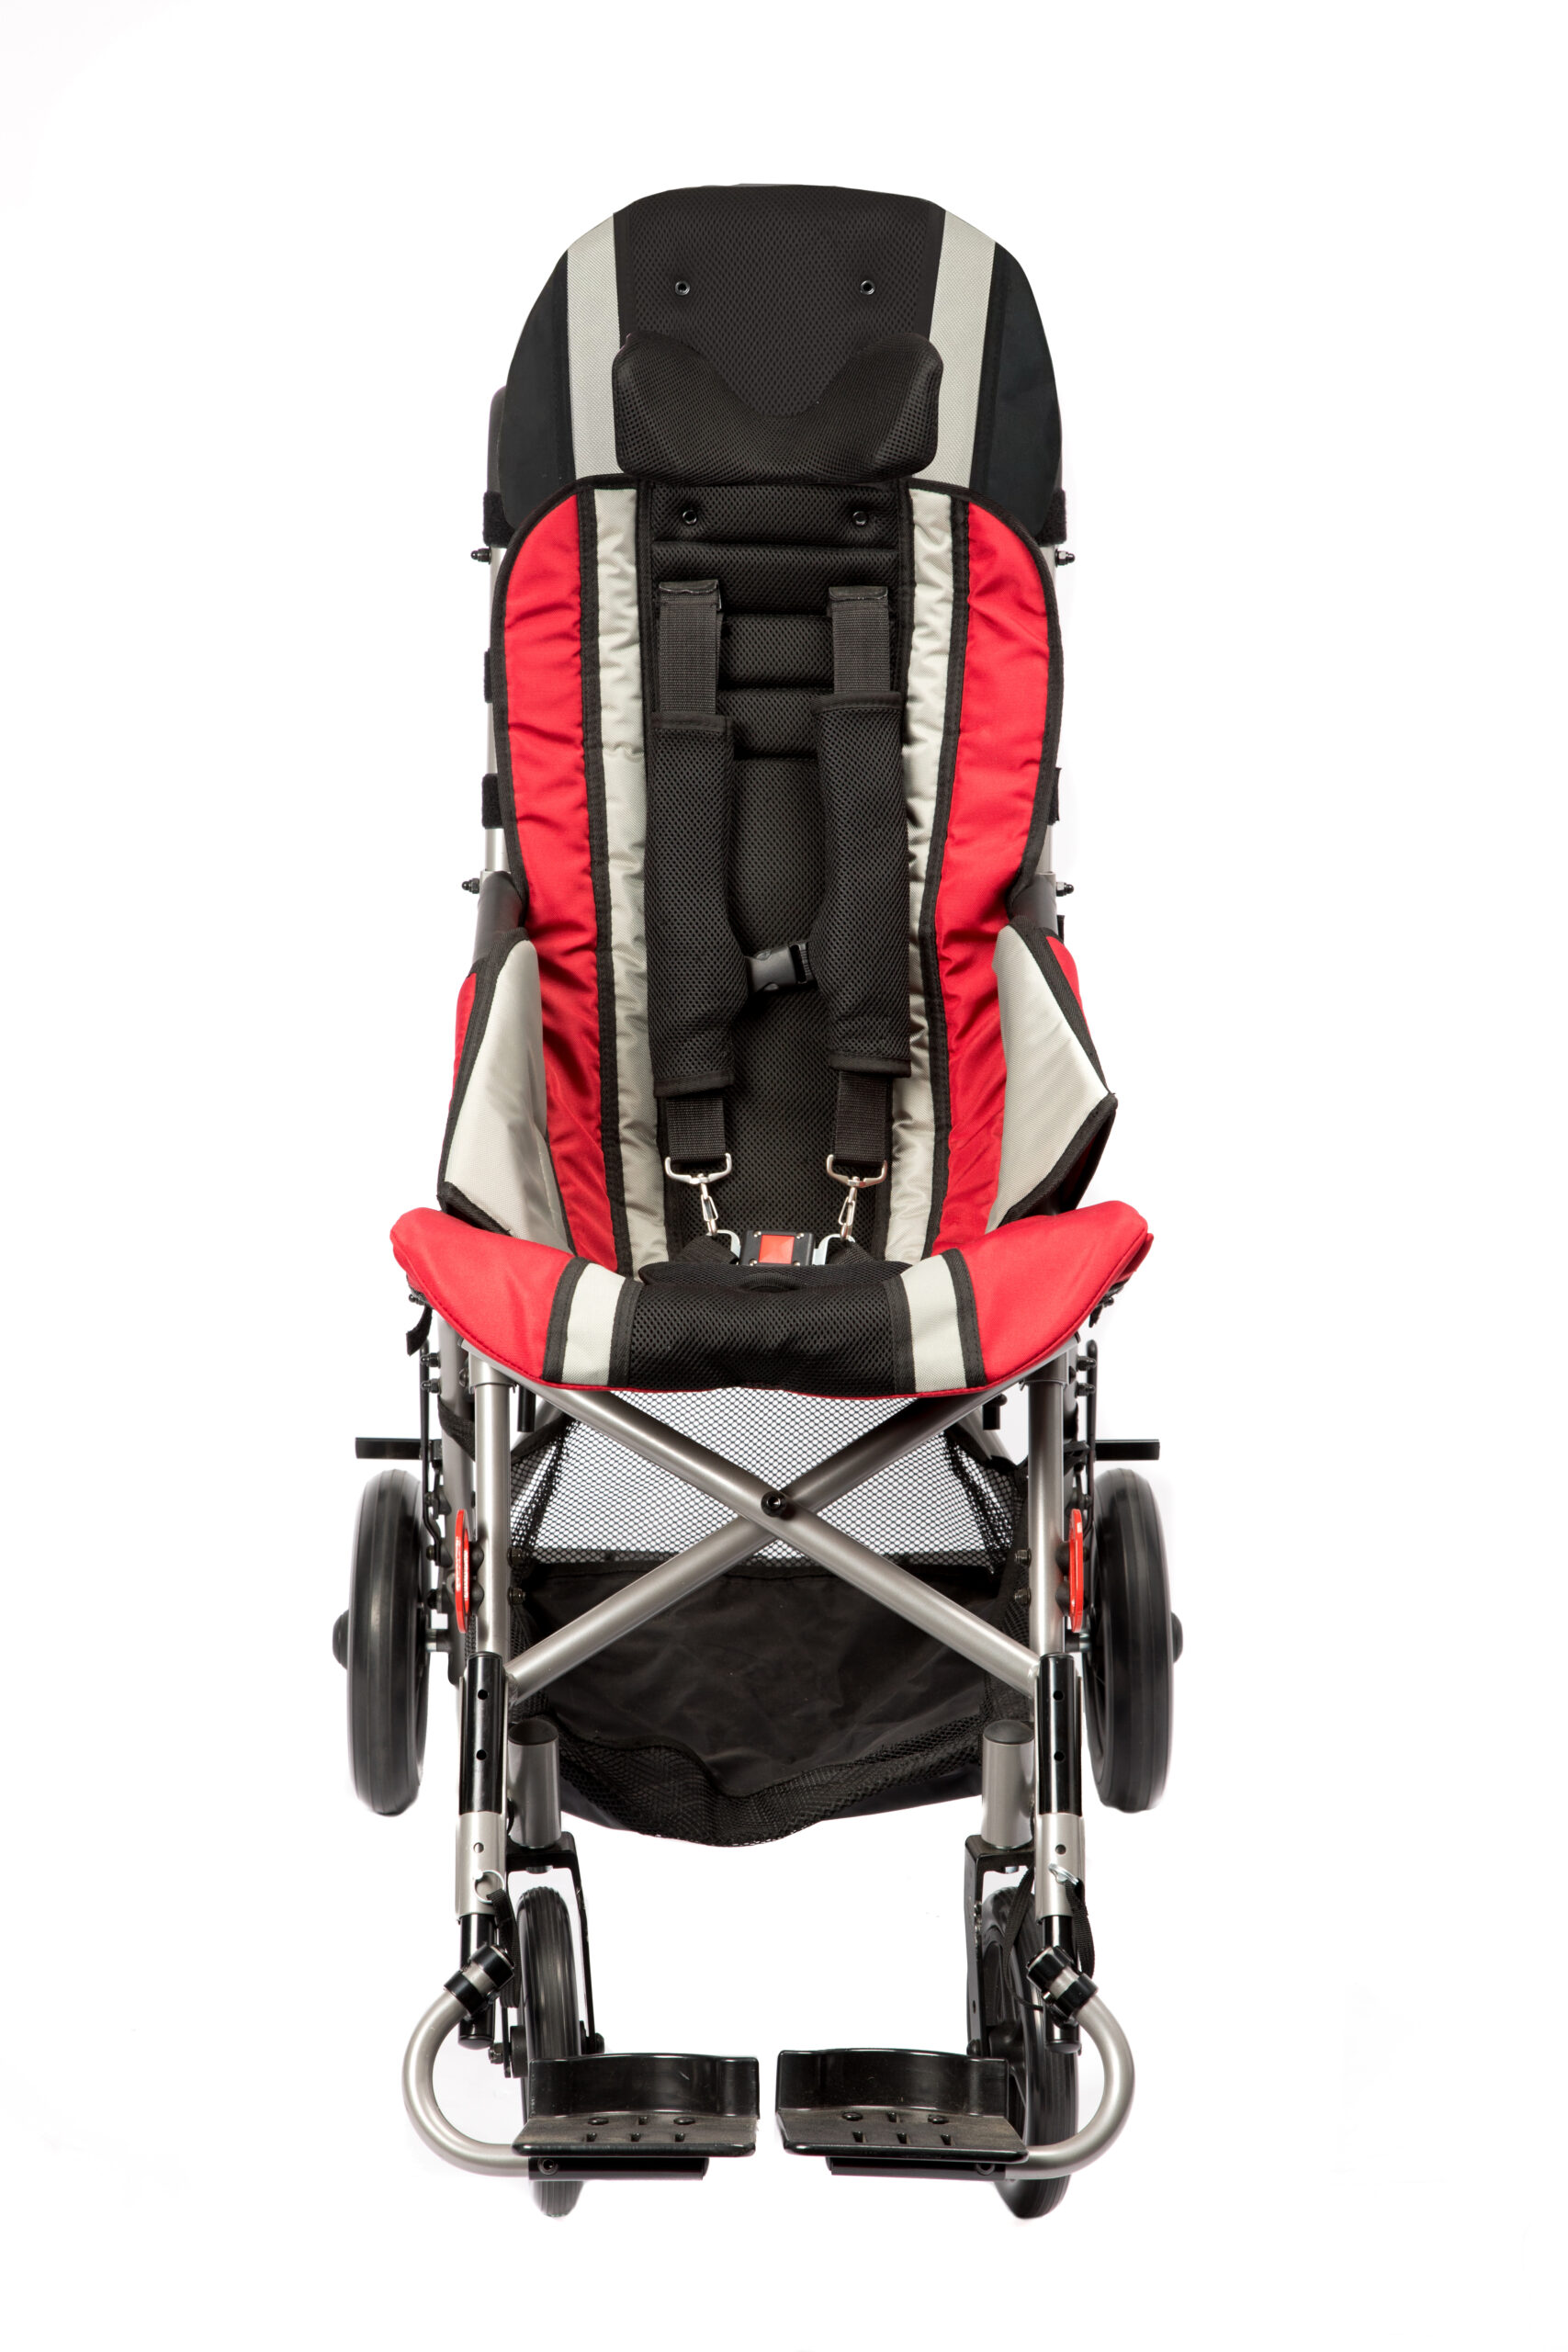 Trotter Mobility Chair Specialty Stroller, Adaptive Stroller